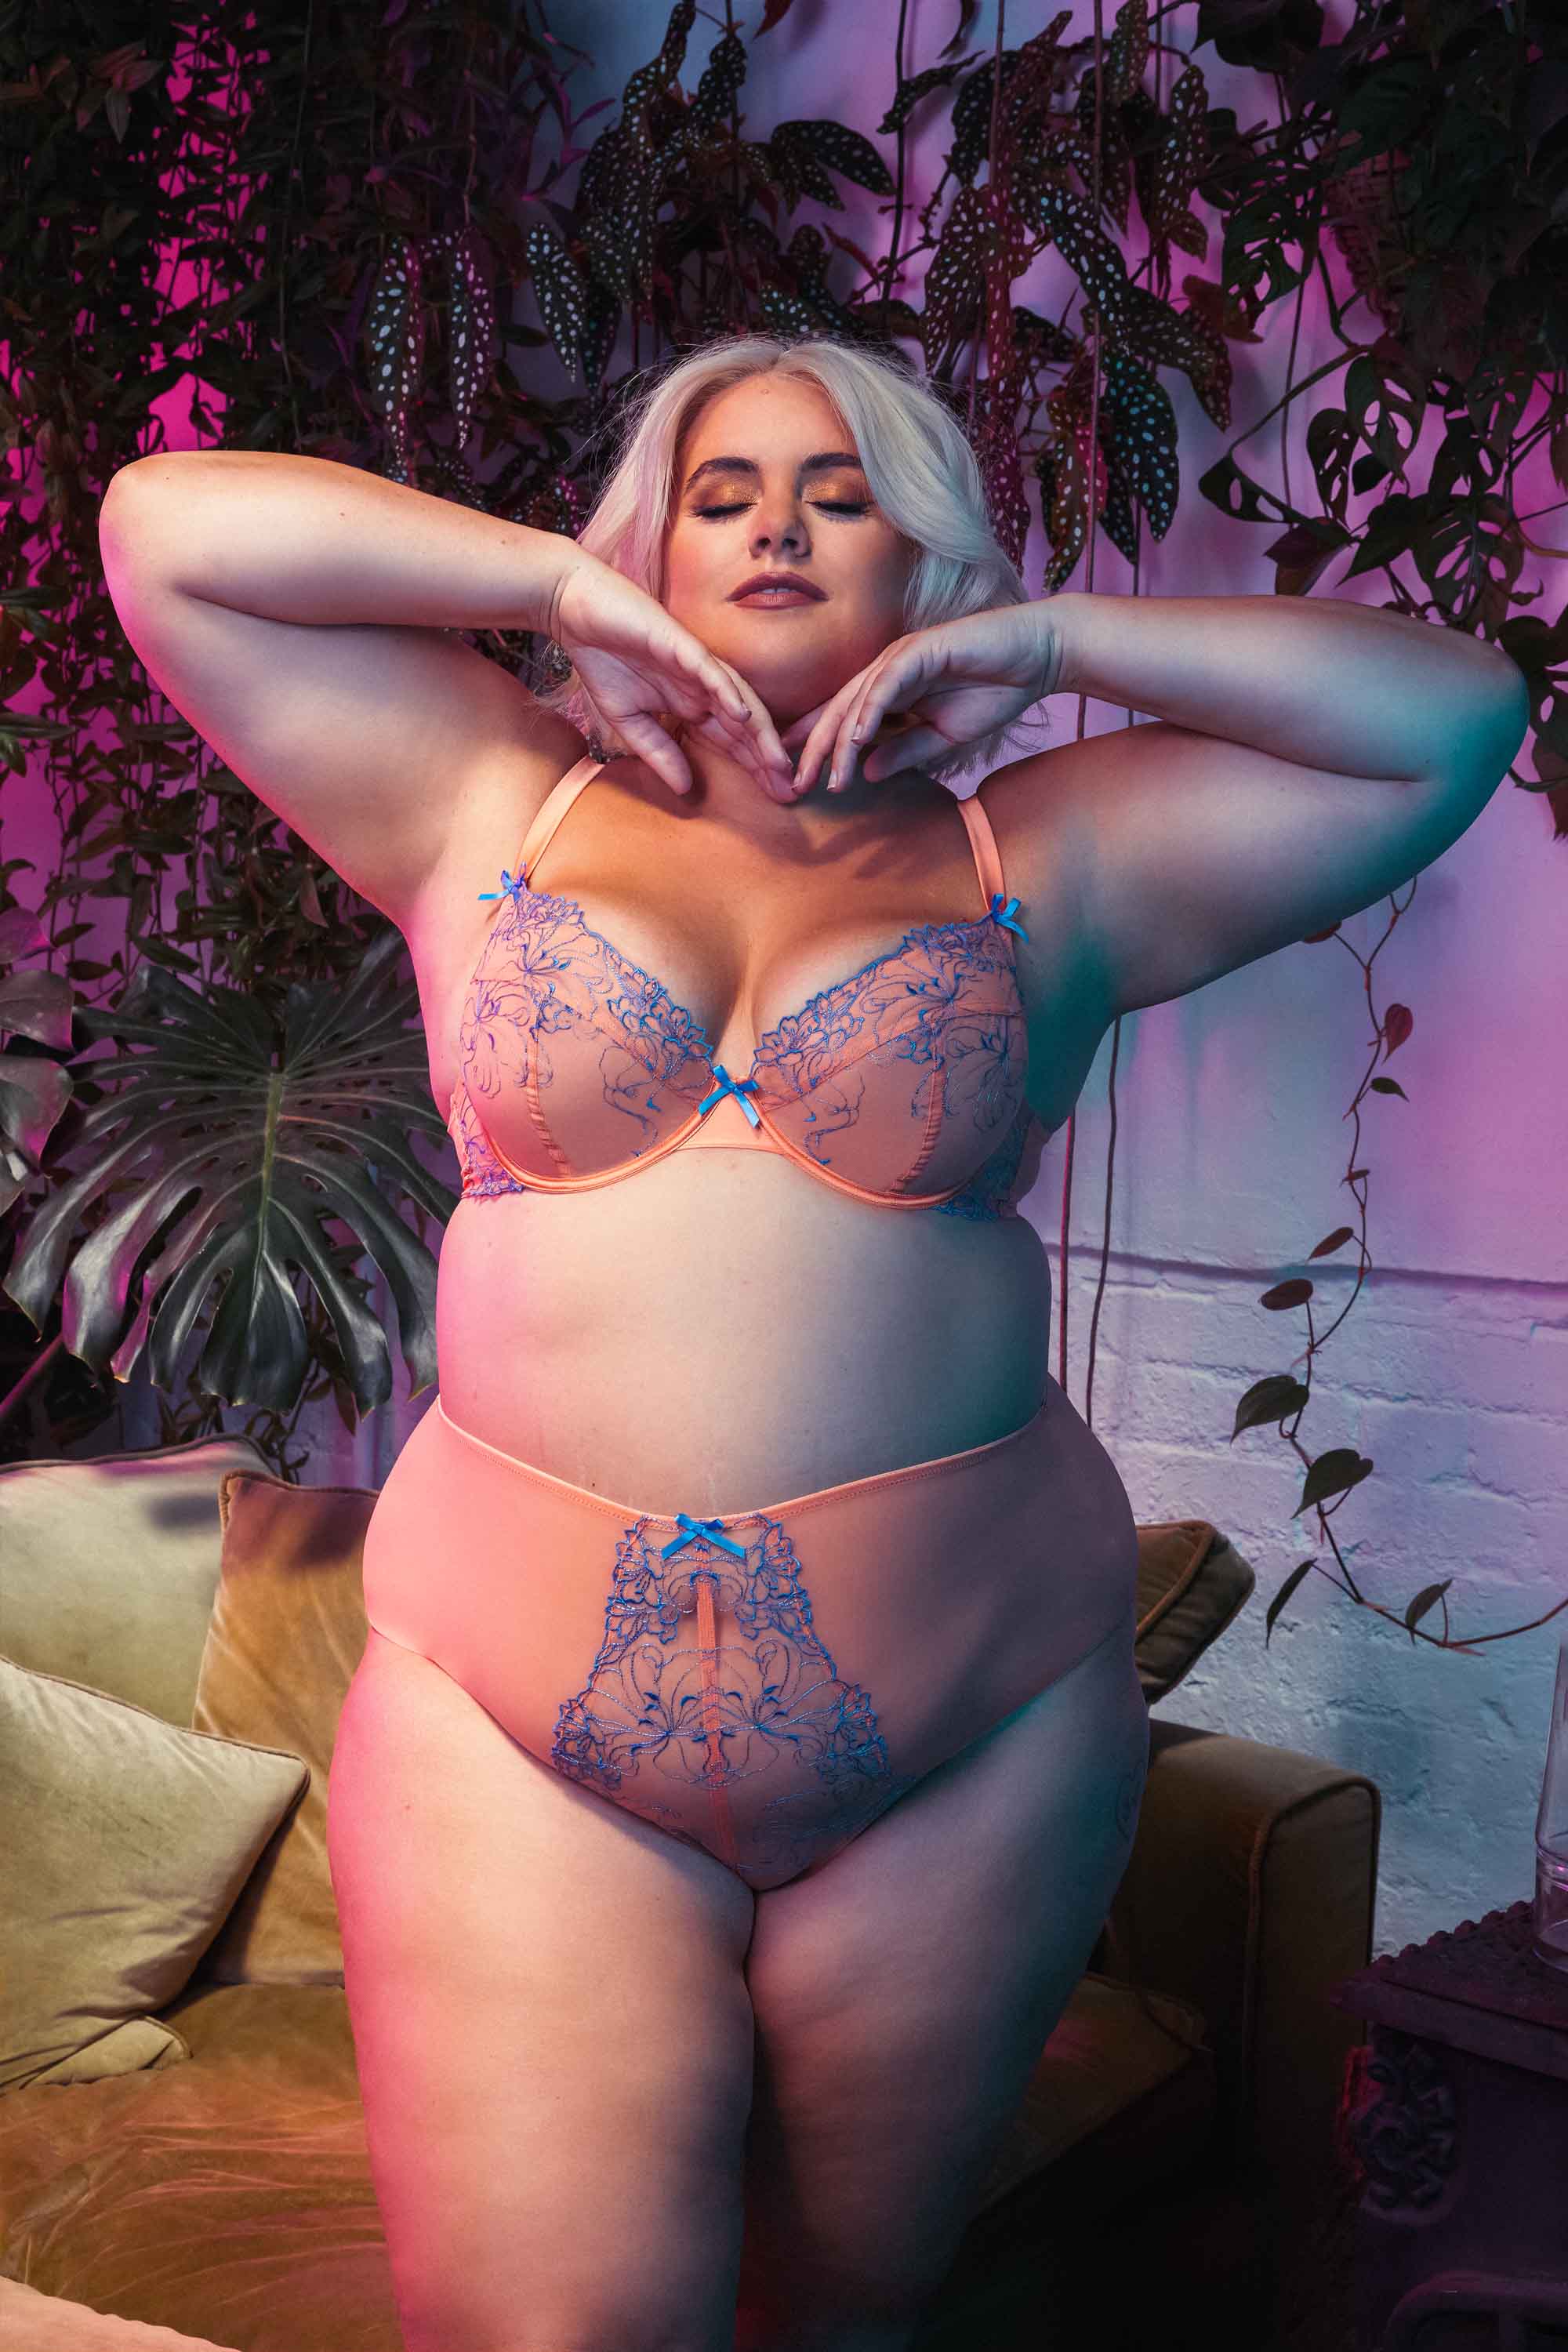 Mesh and lace orange bra and brief set with lilac/blue lace embroidery accents and bows, seen on Felicity Hayward.